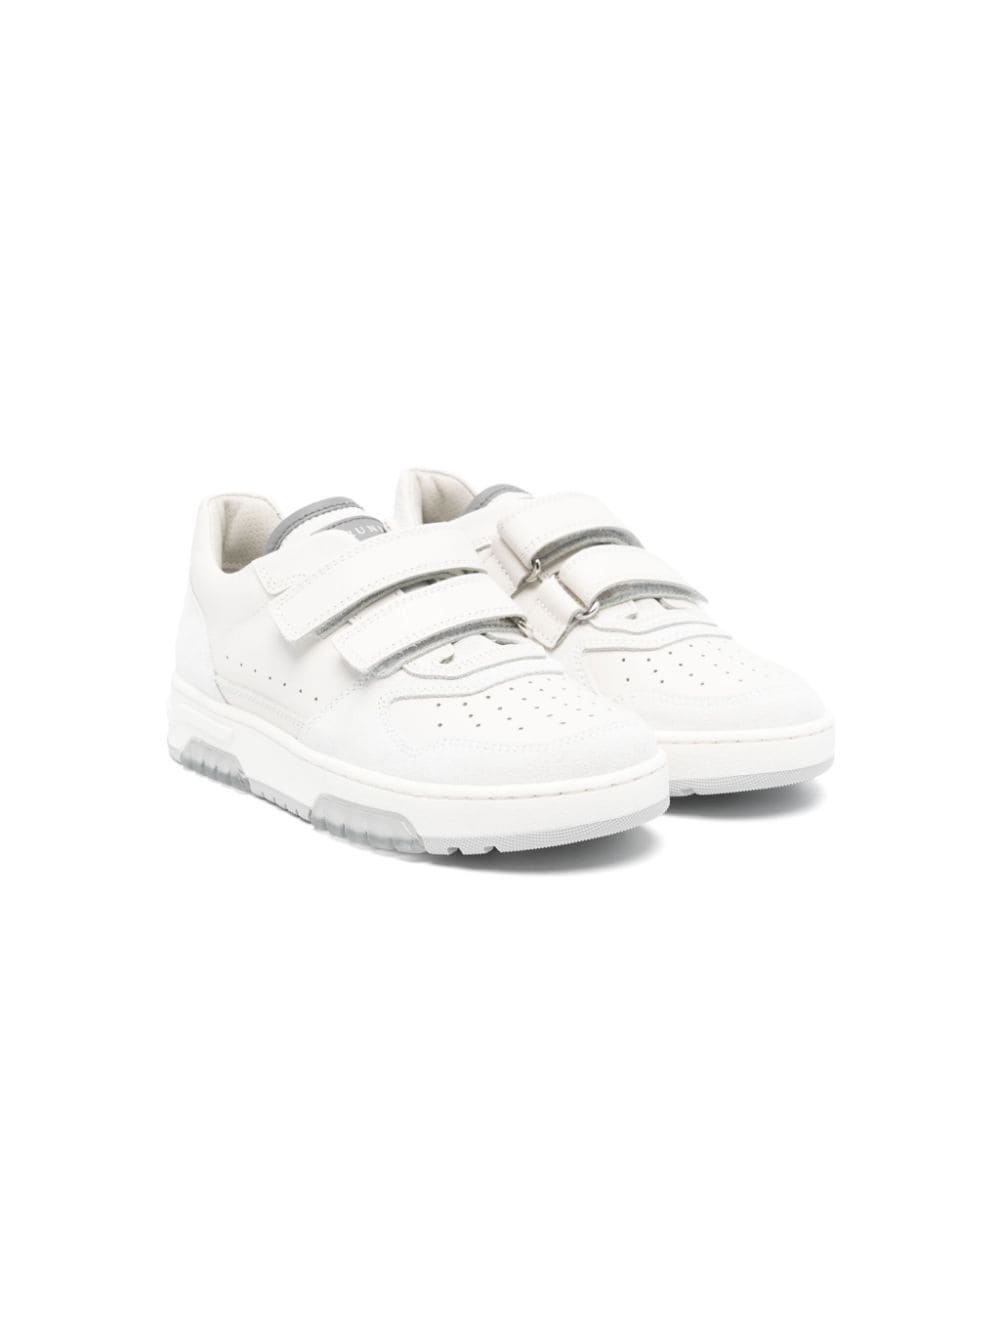 Brunello Cucinelli Kids' Leather Low-top Sneakers In White